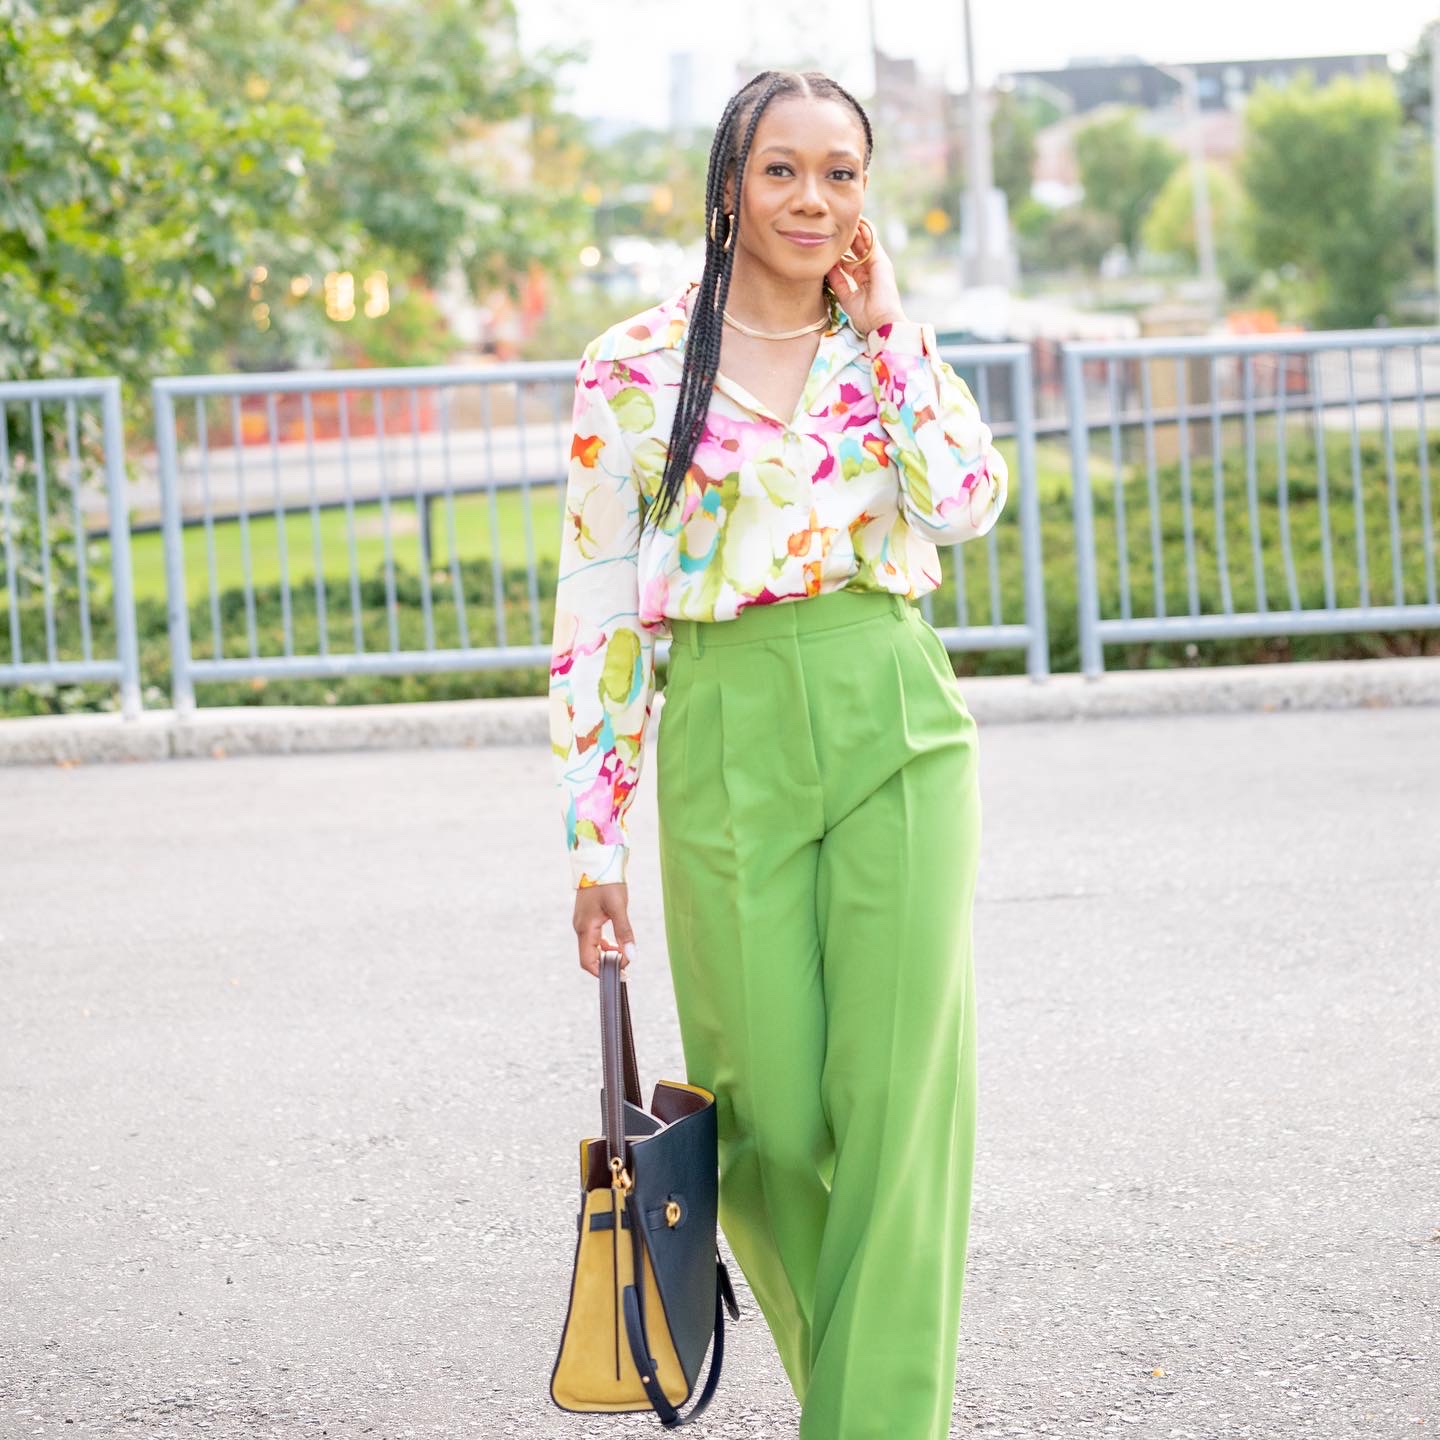 Eyes On Style TO - A Fashion and Lifestyle Blog by Kimberly Mitchell